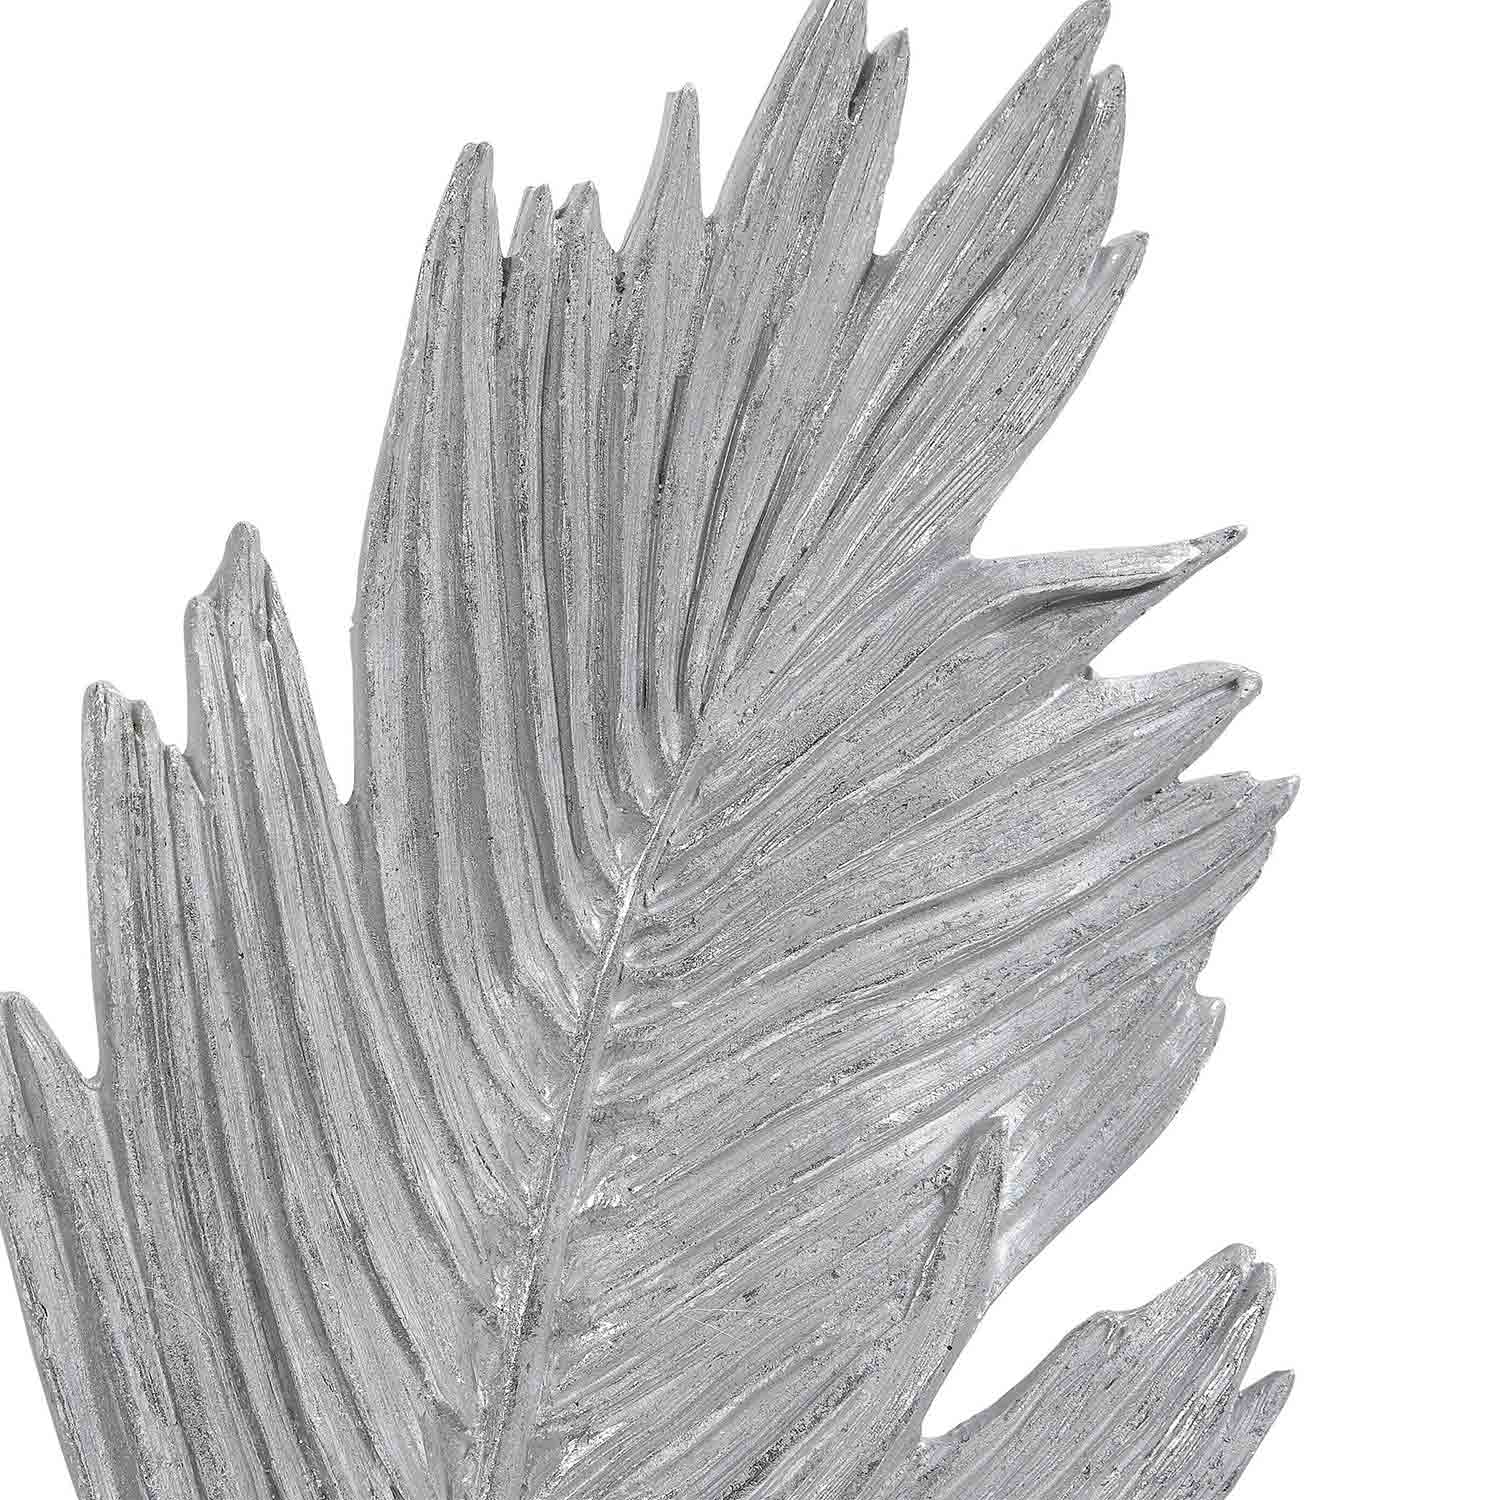 Uttermost Sparrow Silver Wall Decor - Set of 2